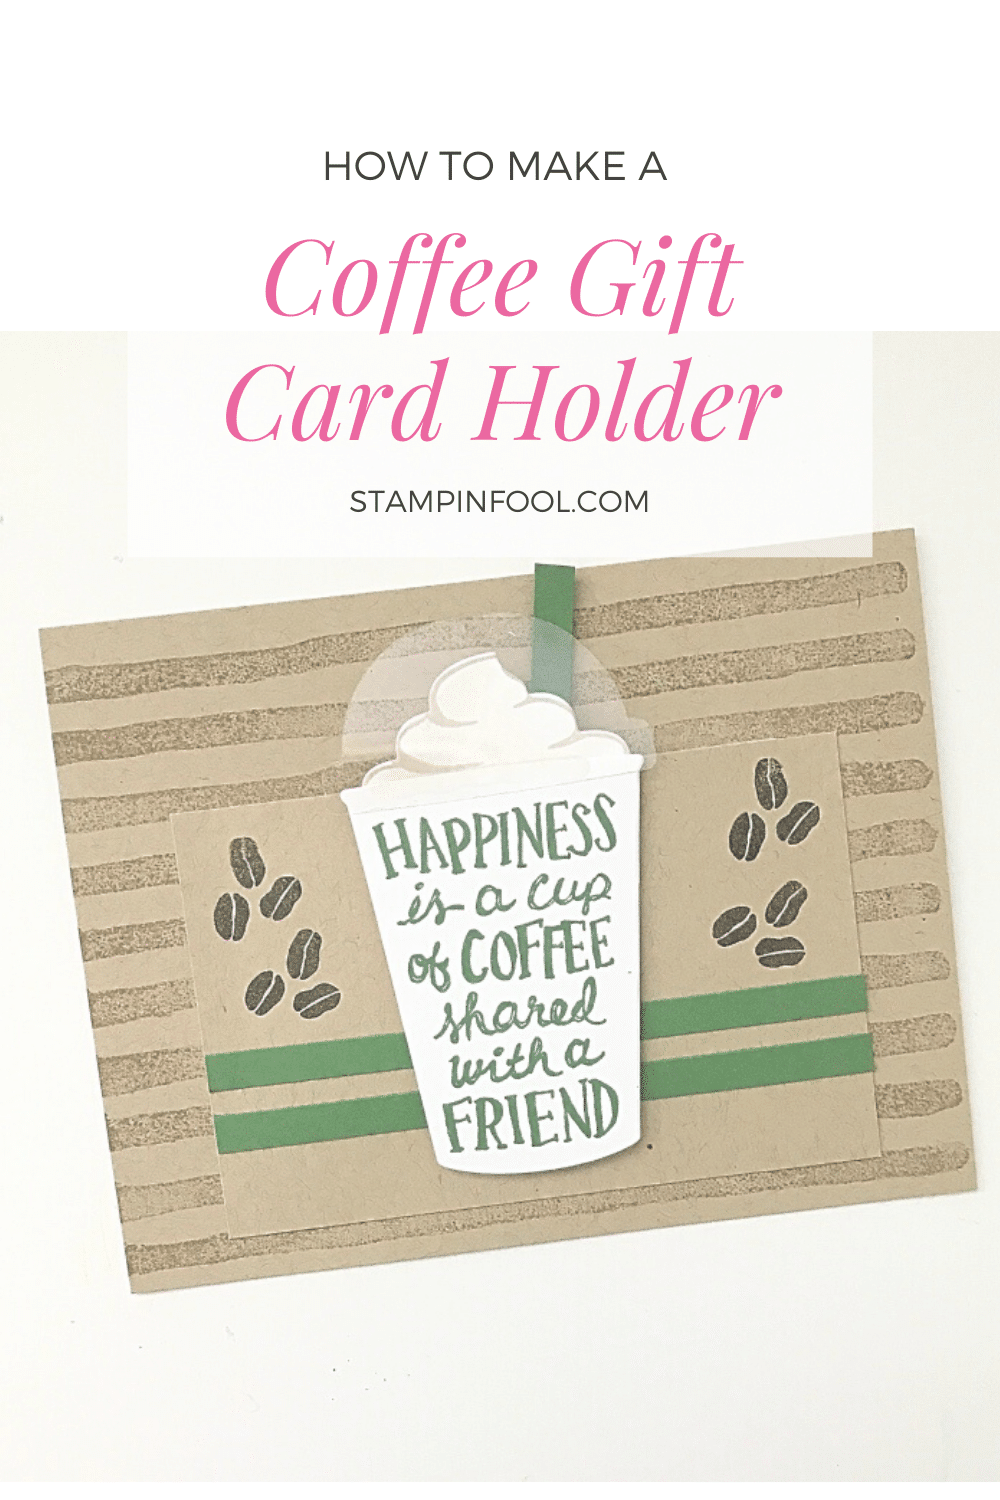 How to Make a DIY Coffee Gift Card Holder for a coffee lover, teacher gift or Valentine's Day Gift from StampinFool.com